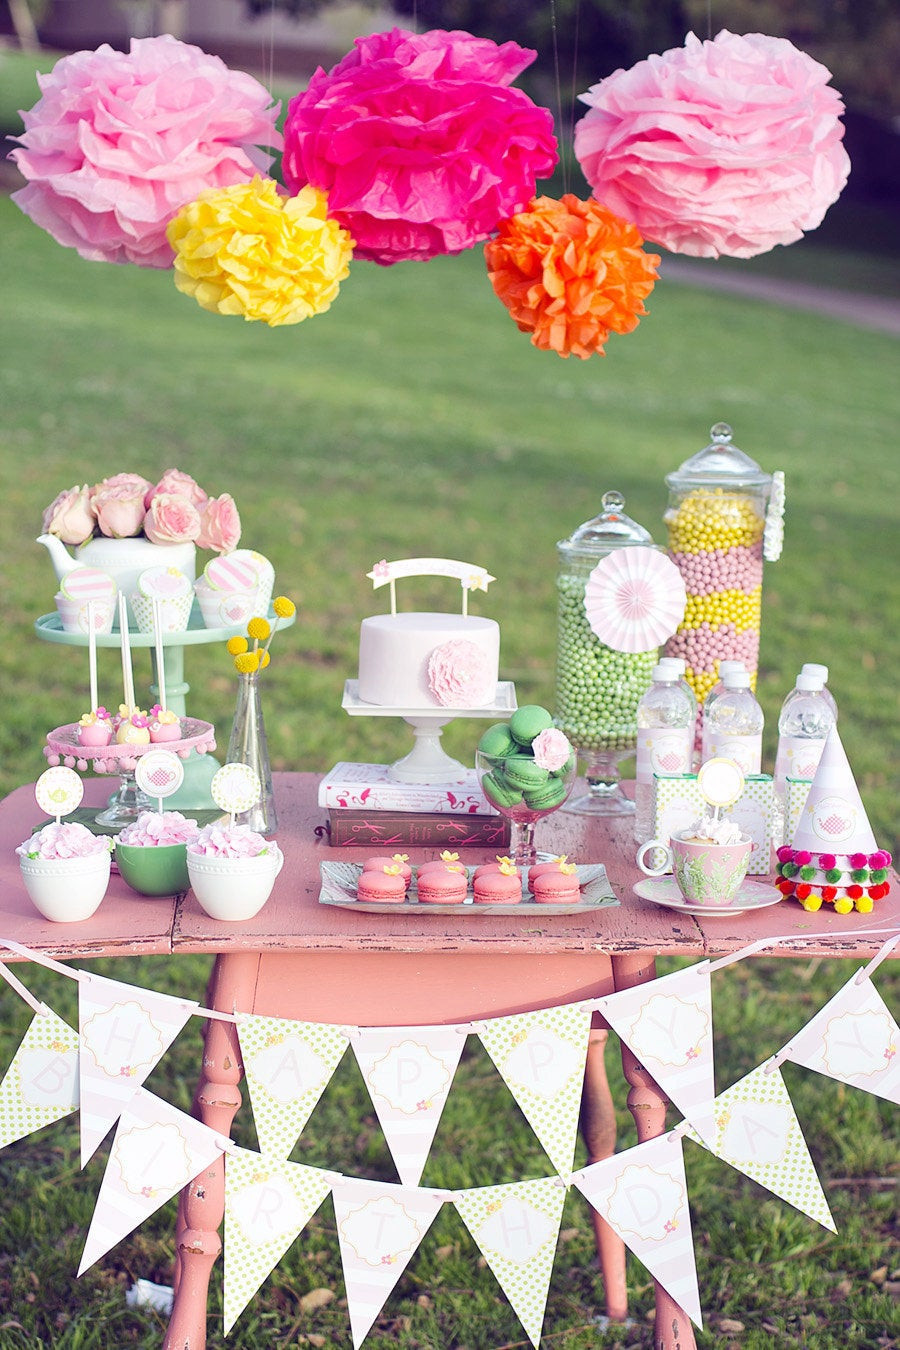 Backyard Tea Lights Party Ideas
 Printable Garden Tea Party Package Featured on Hostess with